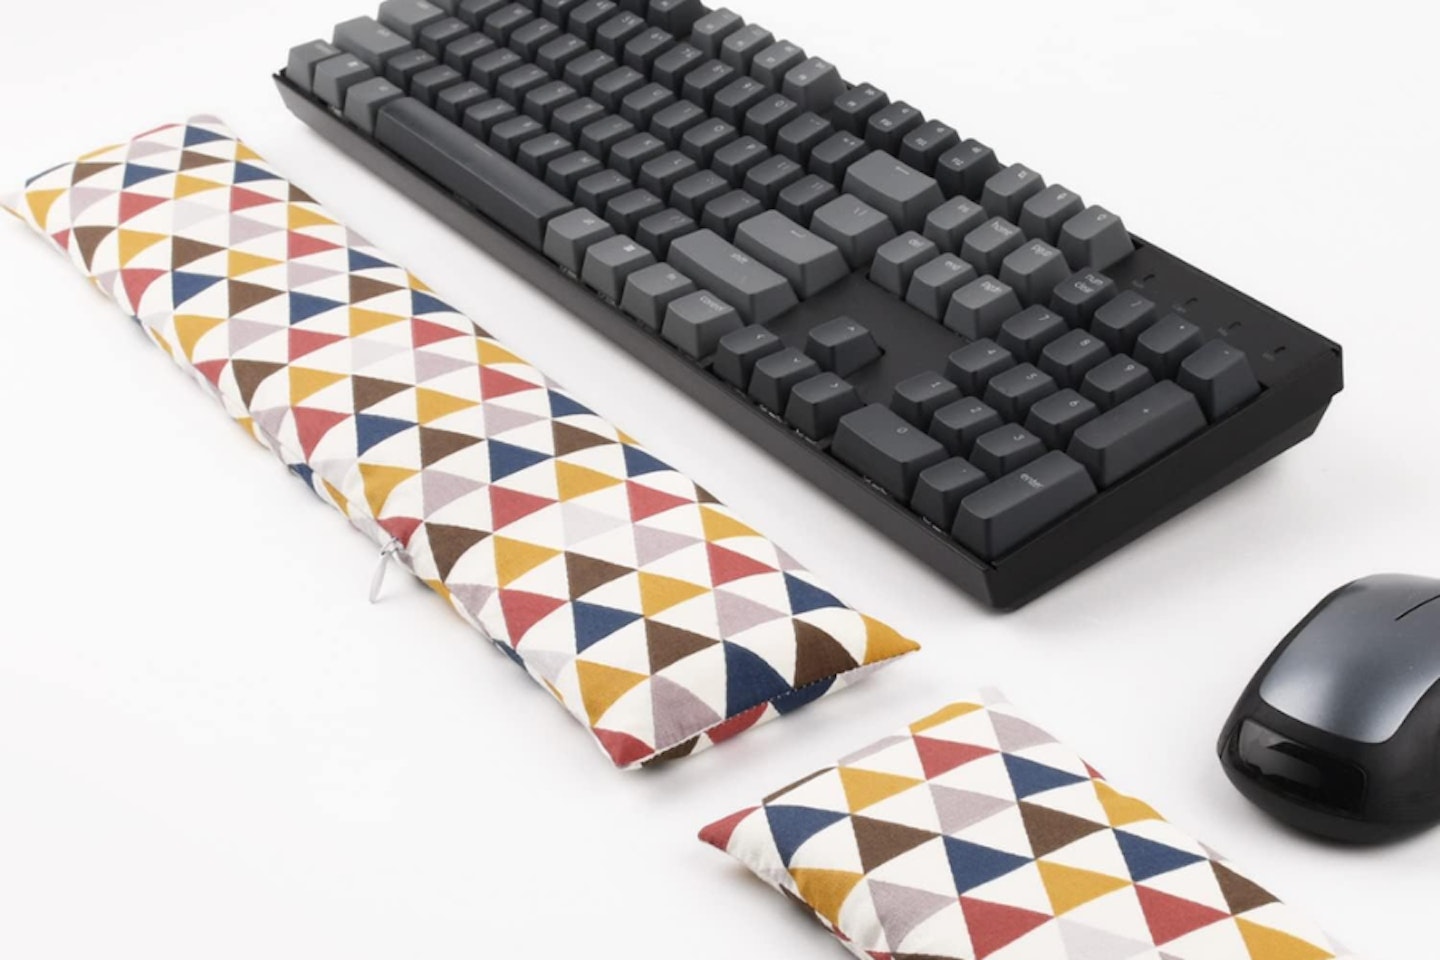 CandoCraft Keyboard and Mouse Wrist Rest Bean Bag Set - possibly the best keyboard wrist rest